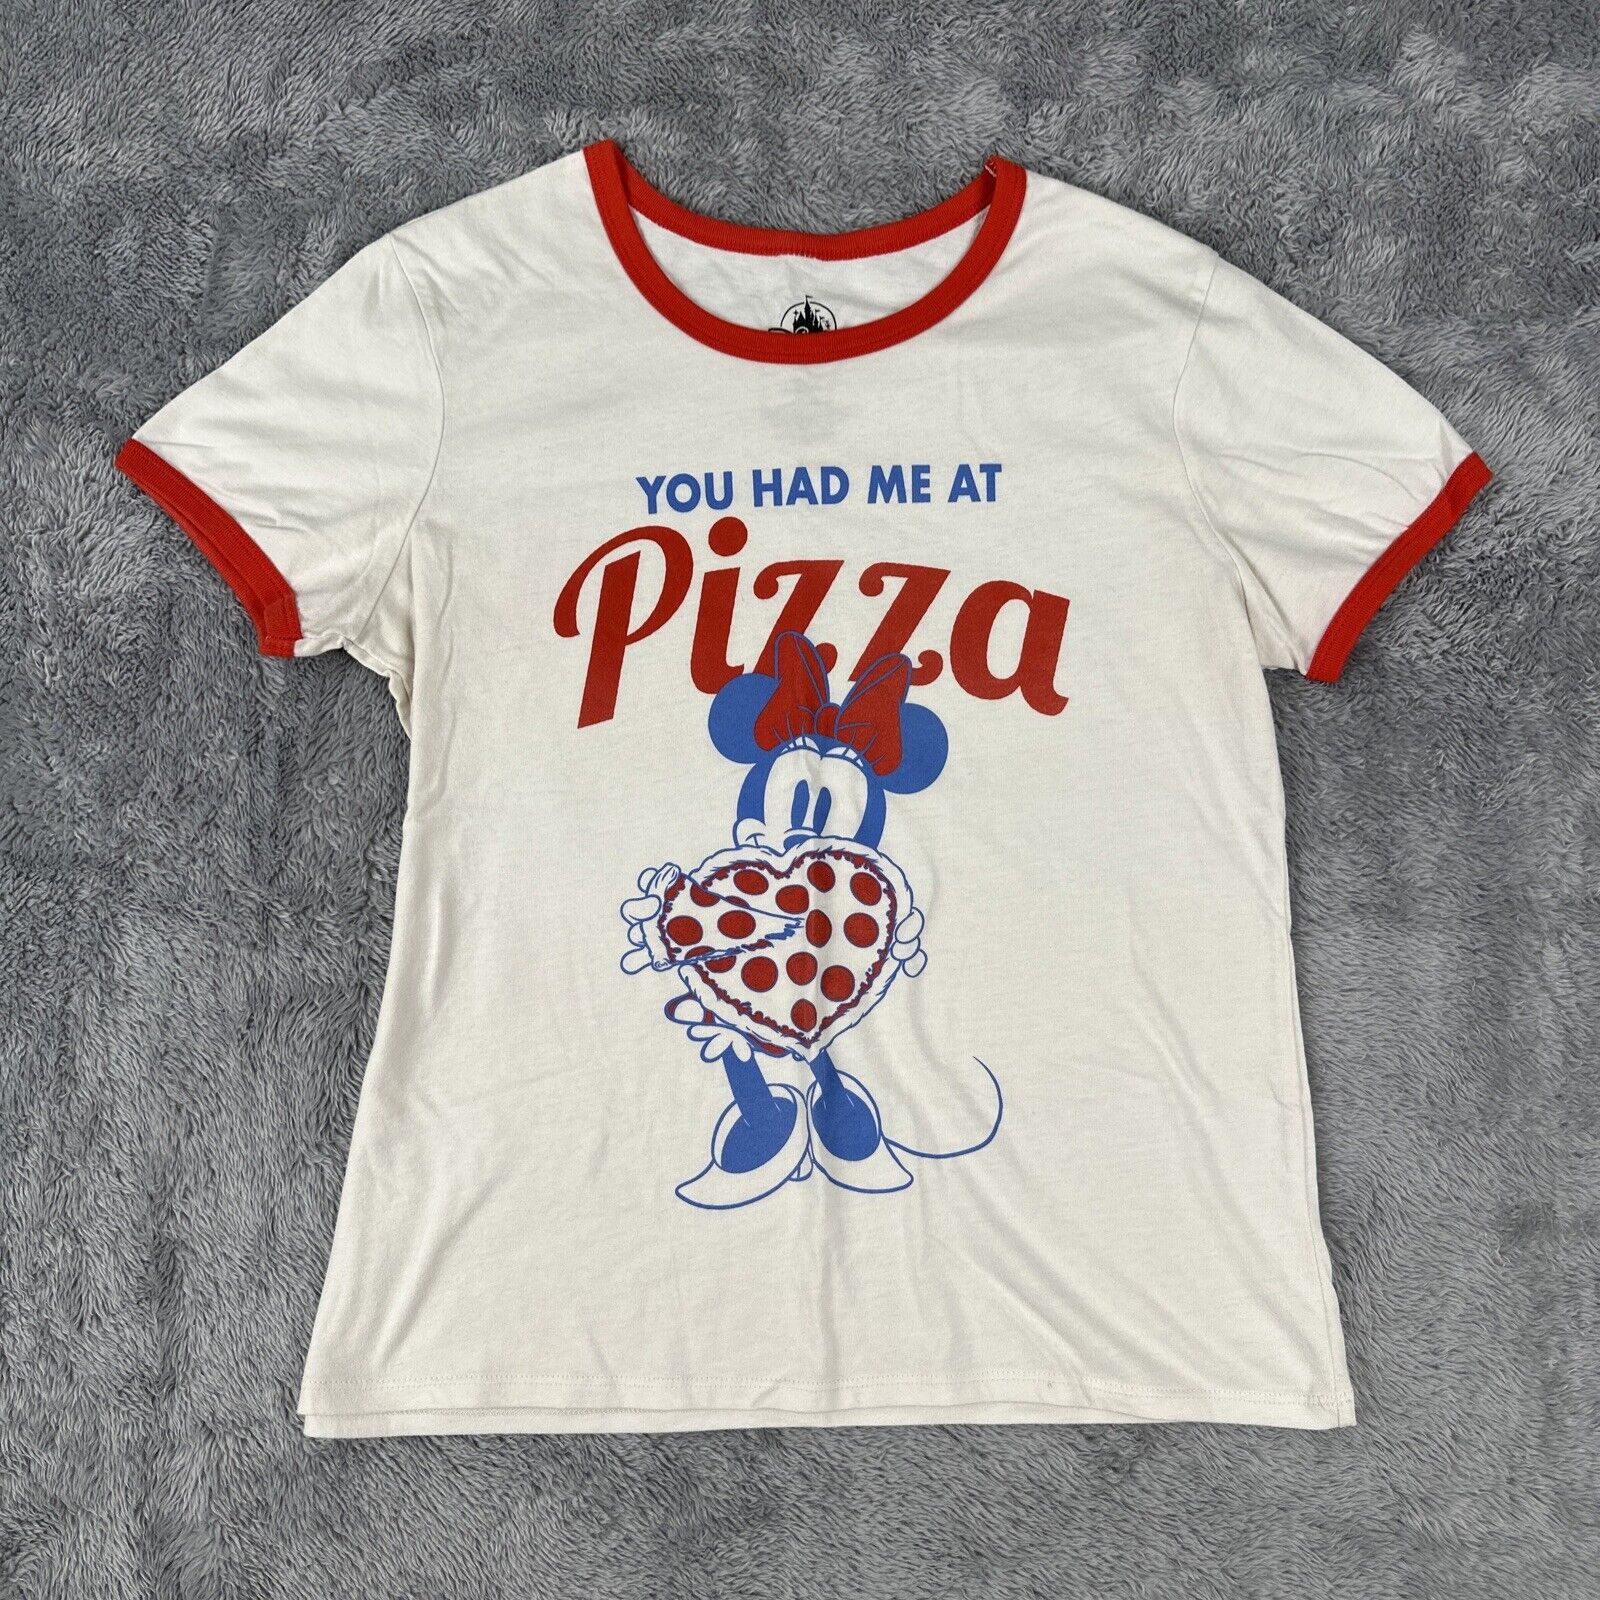 Disney Parks Minnie Mouse You Had Me At Pizza Ringer Tee T-shirt Women’s Medium